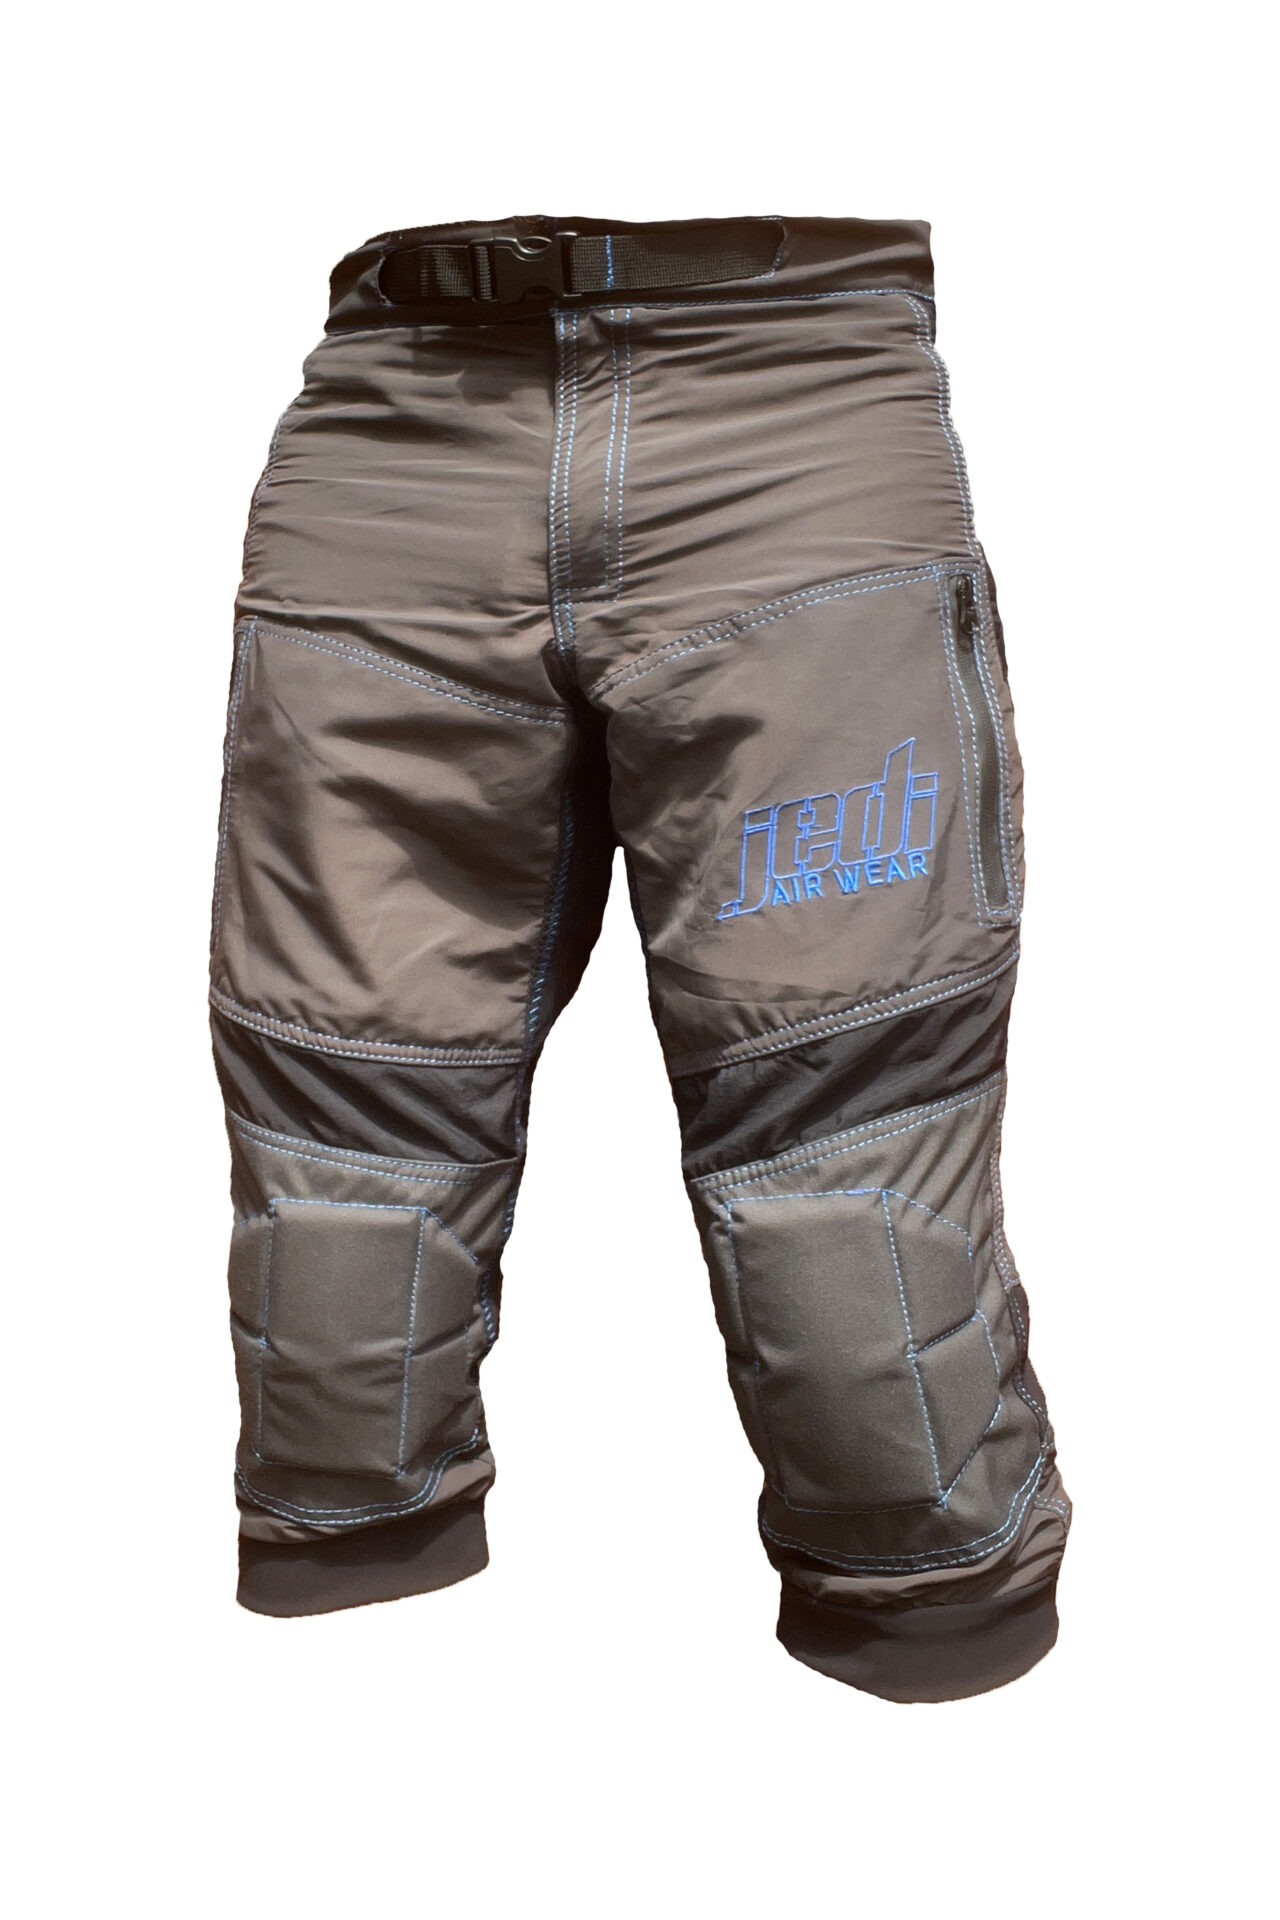 skydiving shorts | Jedi Air Wear Skydiving Suits and Gear Store